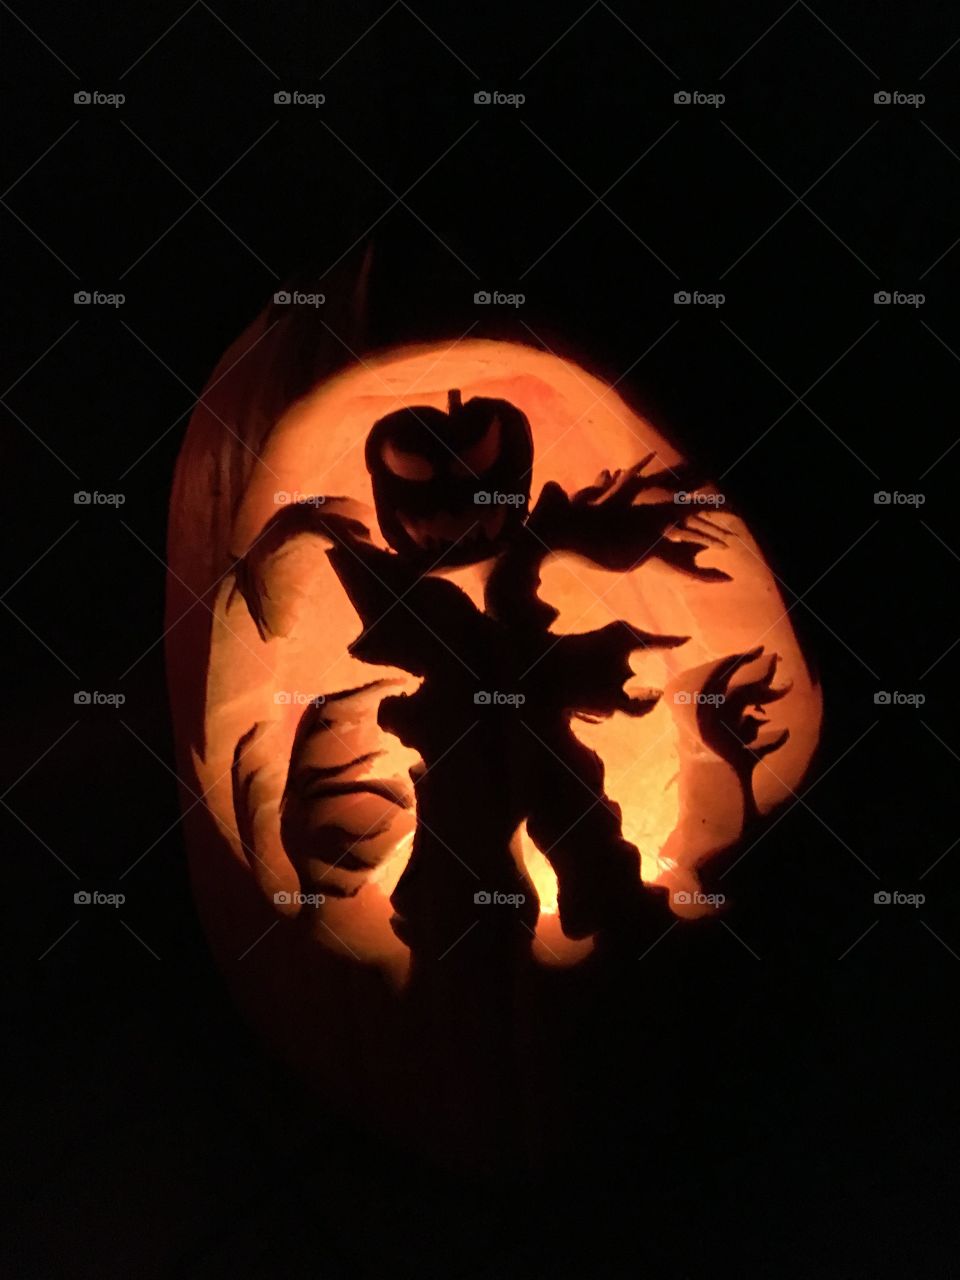 This spooky wind blown jack-o-lantern captures the spirit of Halloween 